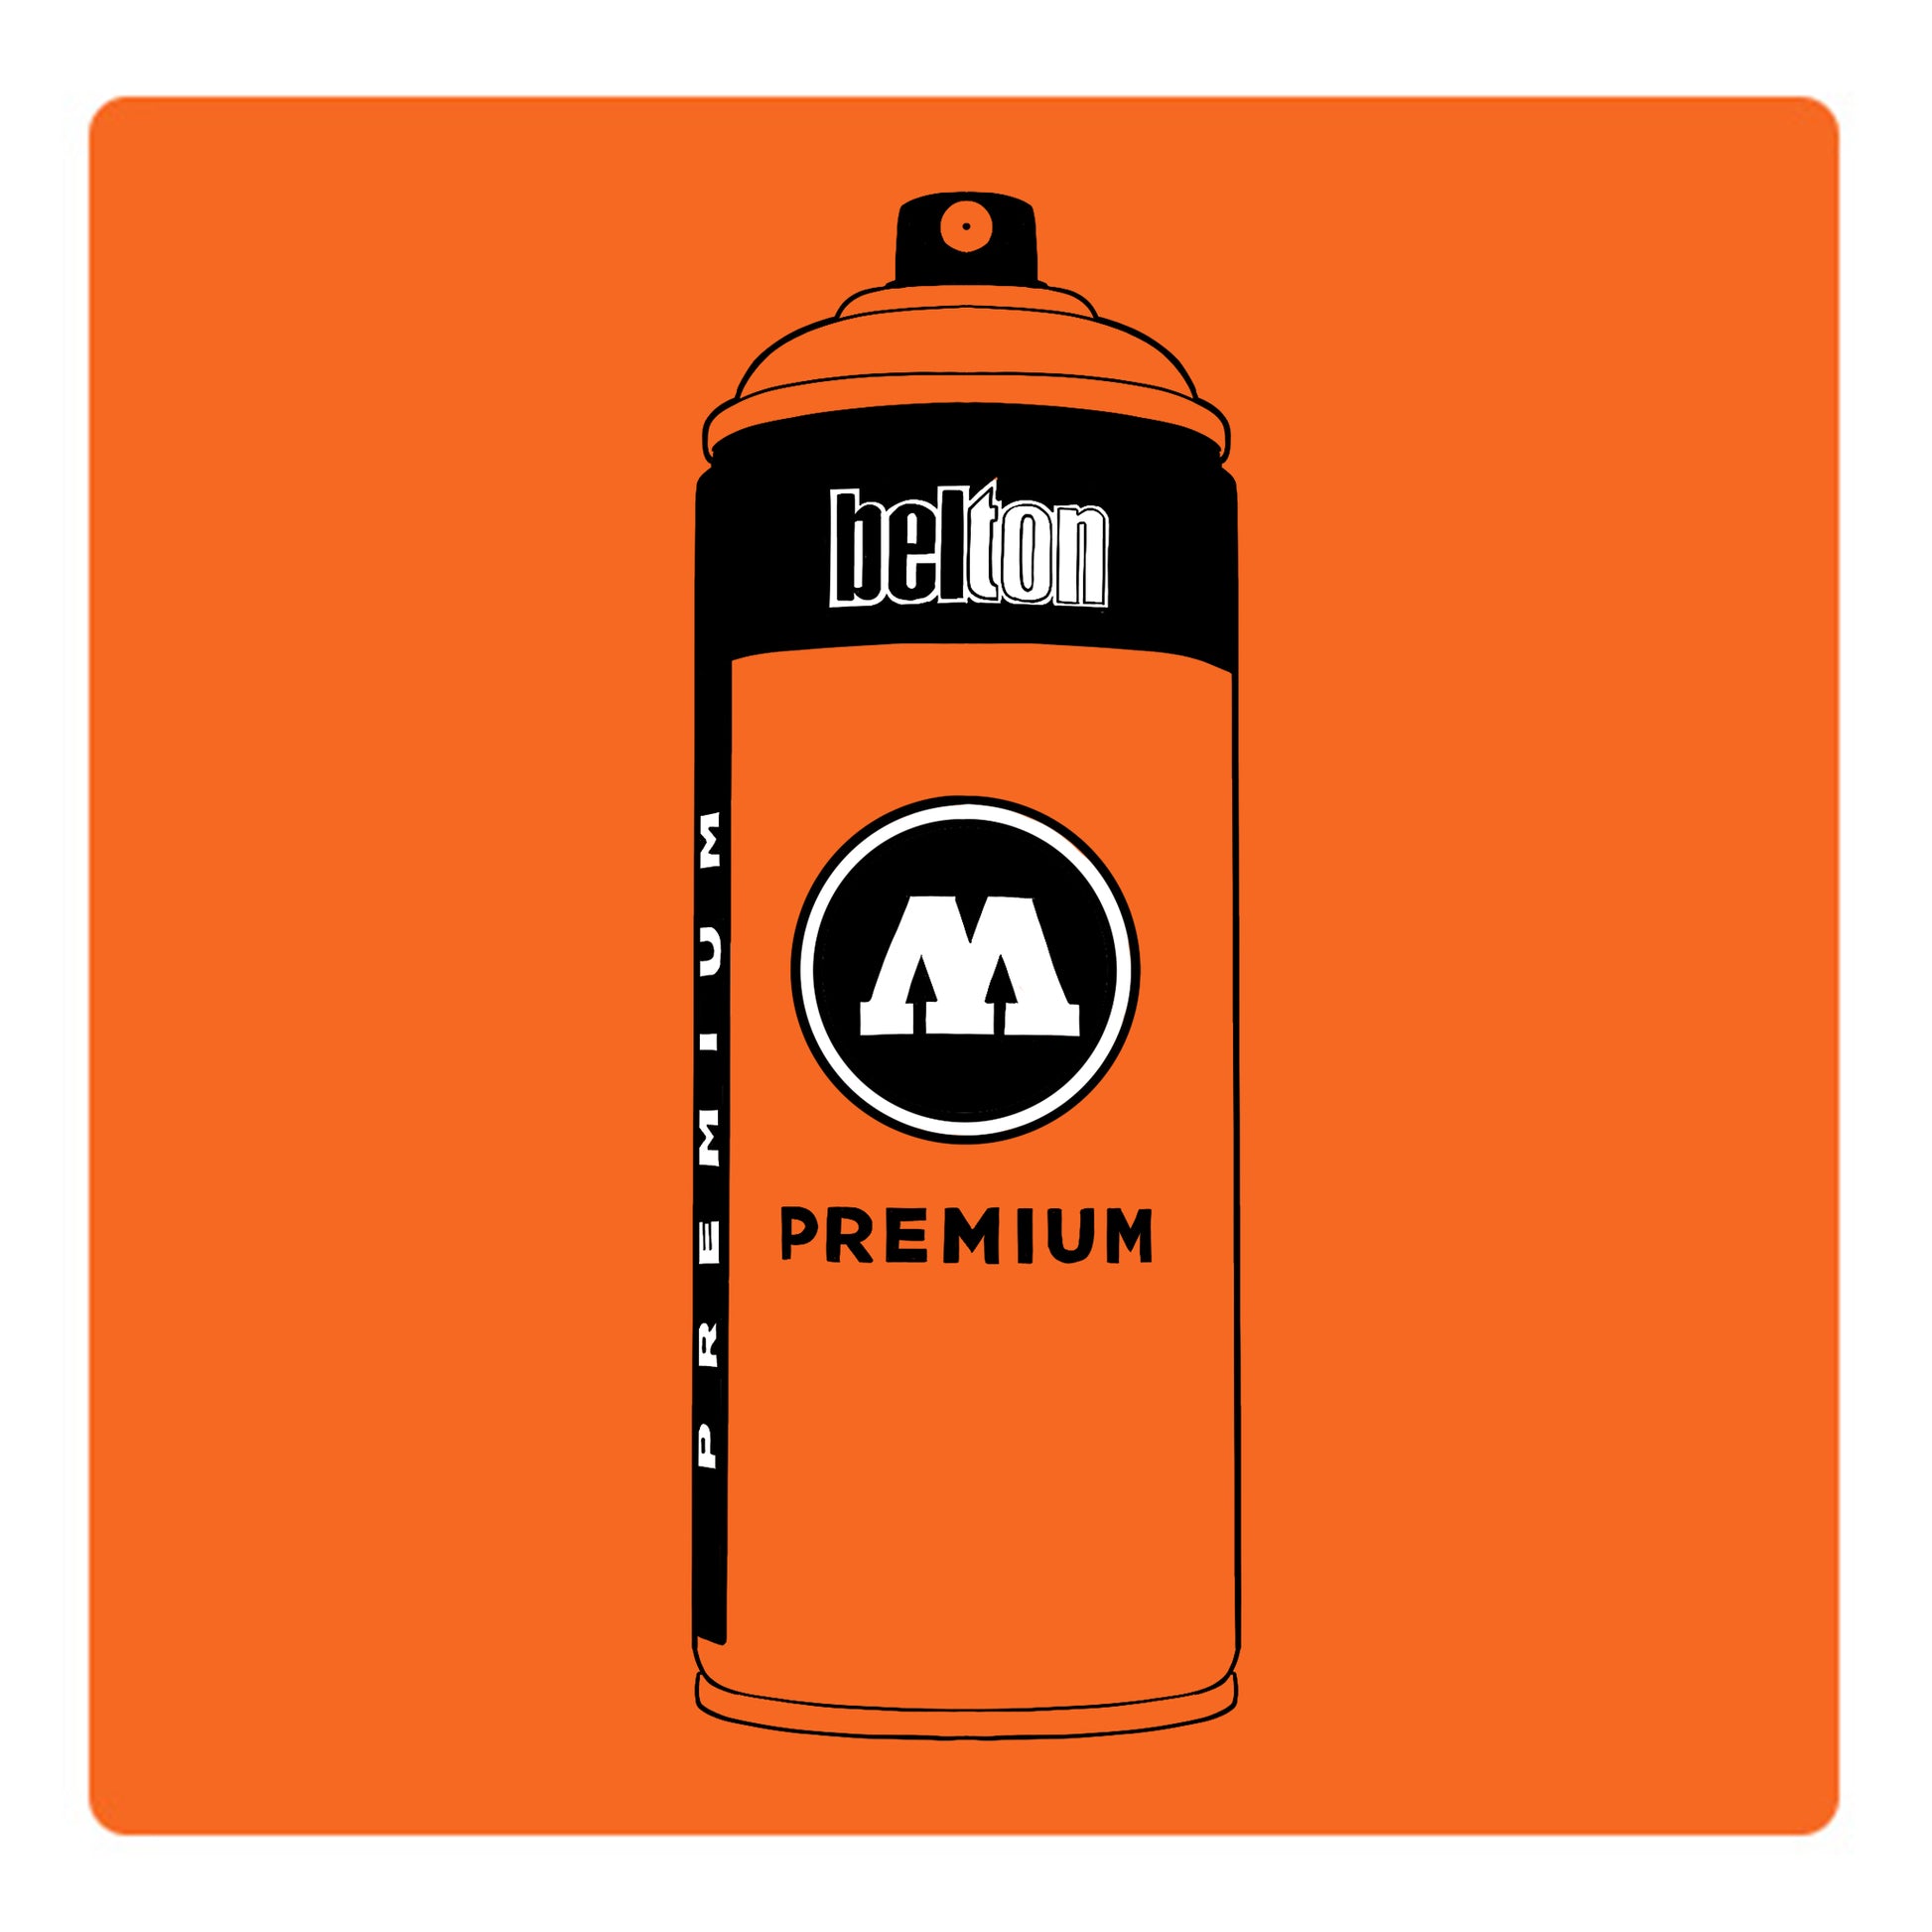 A black outline drawing of a tiger orange spray paint can with the words "belton","premium" and the letter"M" written on the face in black and white font. The background is a color swatch of the same tiger orange with a white border.